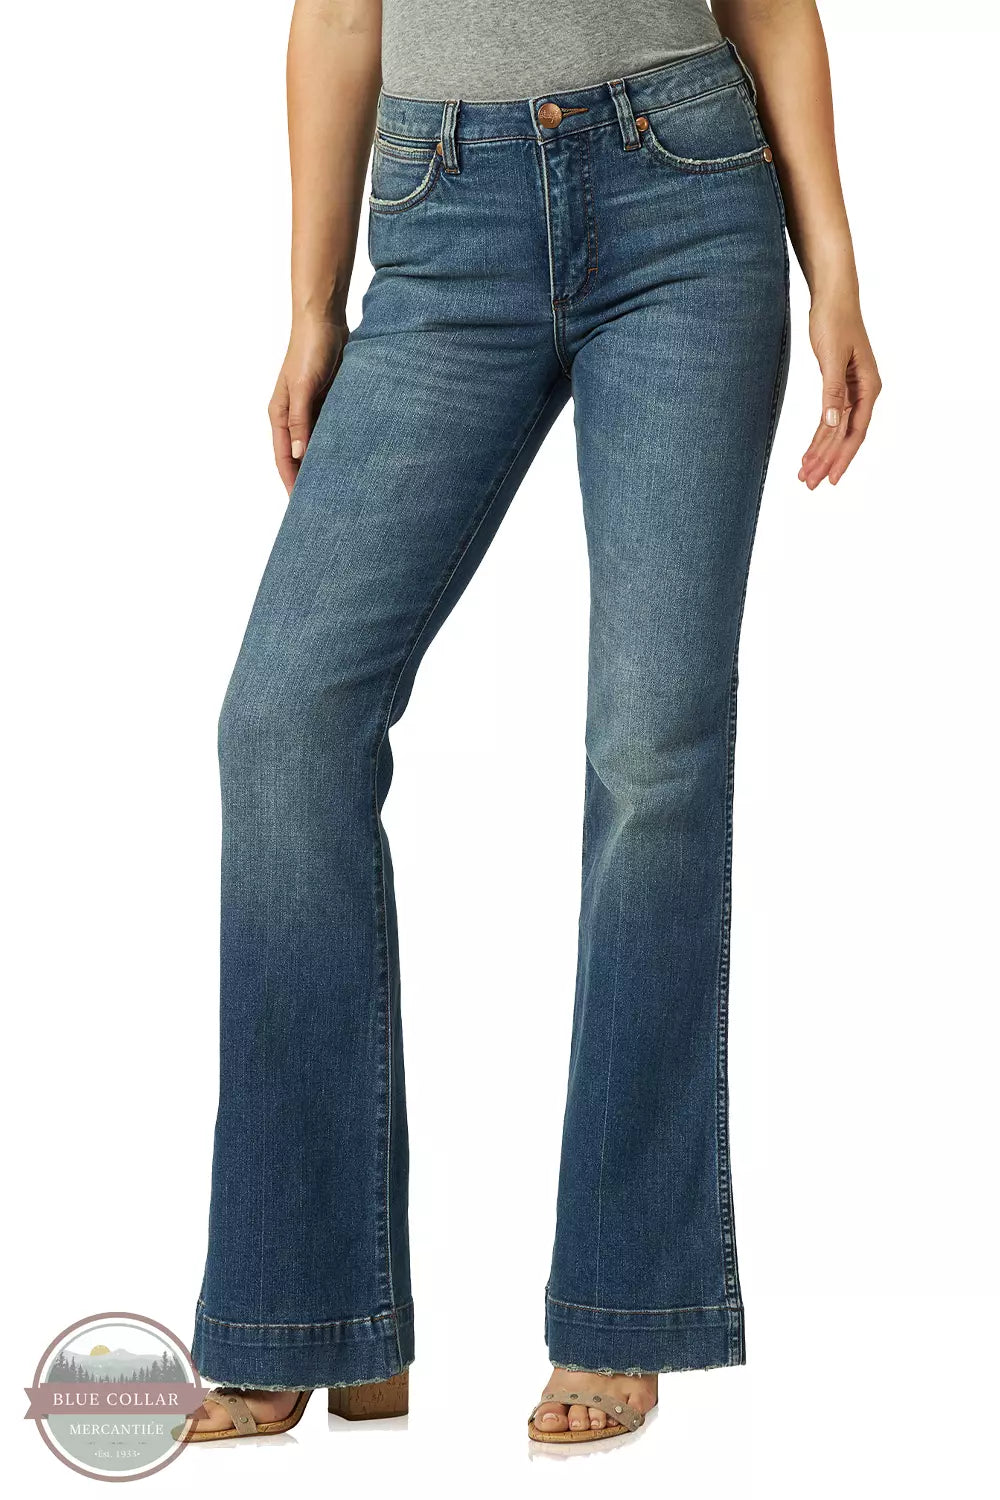 Wrangler 1011MPESY Retro Premium High Rise Slim Trouser Jeans in Shelby Front View